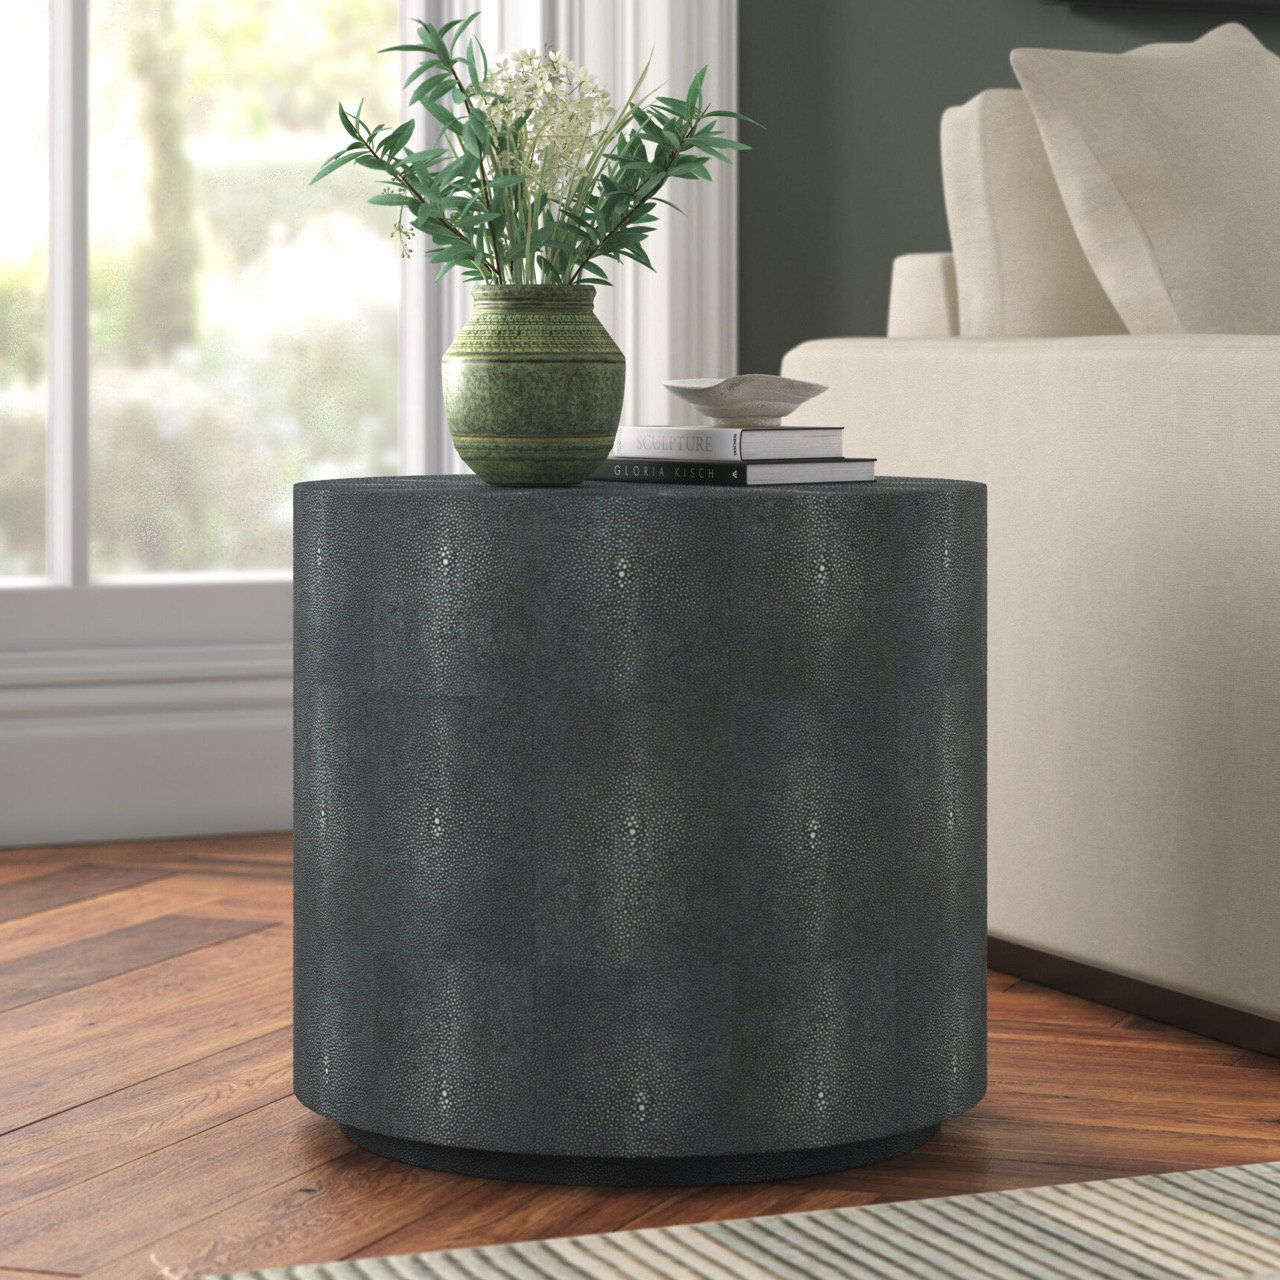 Top Picks: End Tables